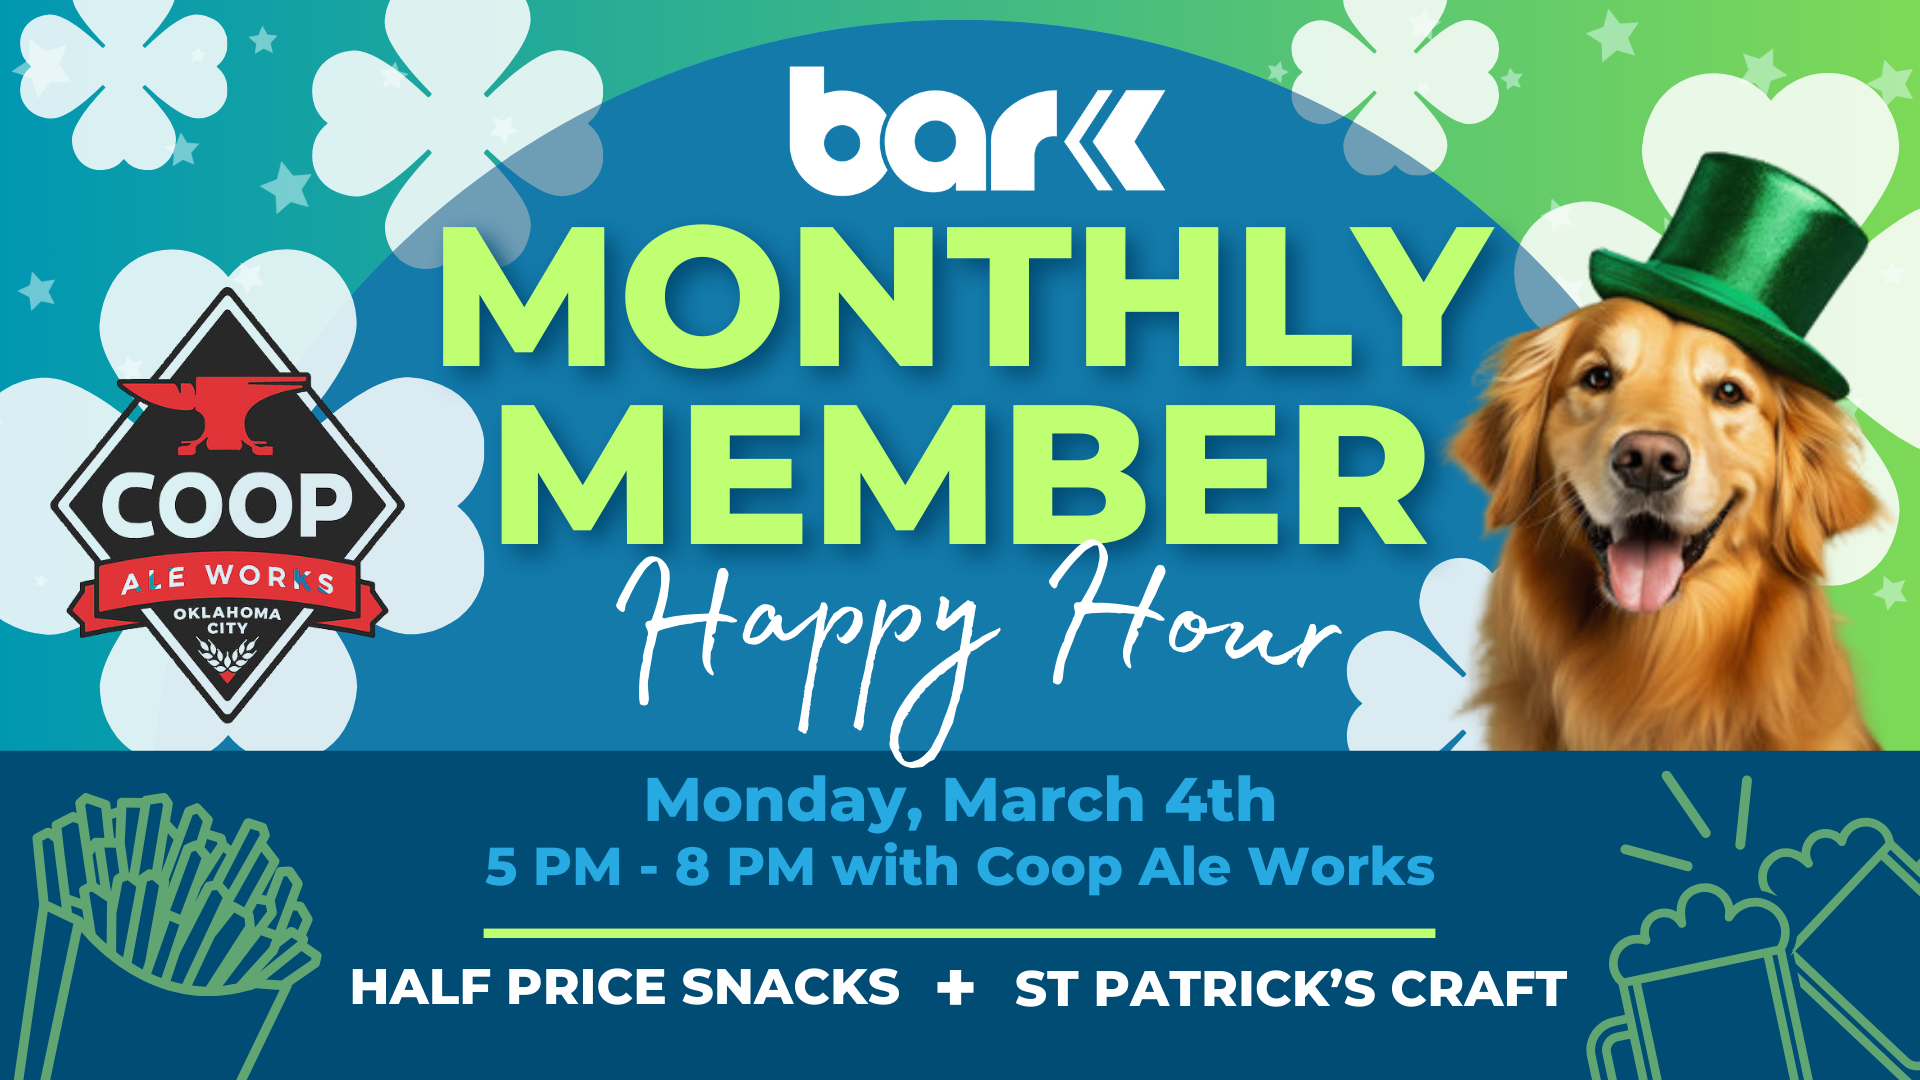 Bar K Monthly member happy hour by Coop Ale Works. Monday, March 4th from 5 to 8 pm. Half price snacks and st patrick's craft.